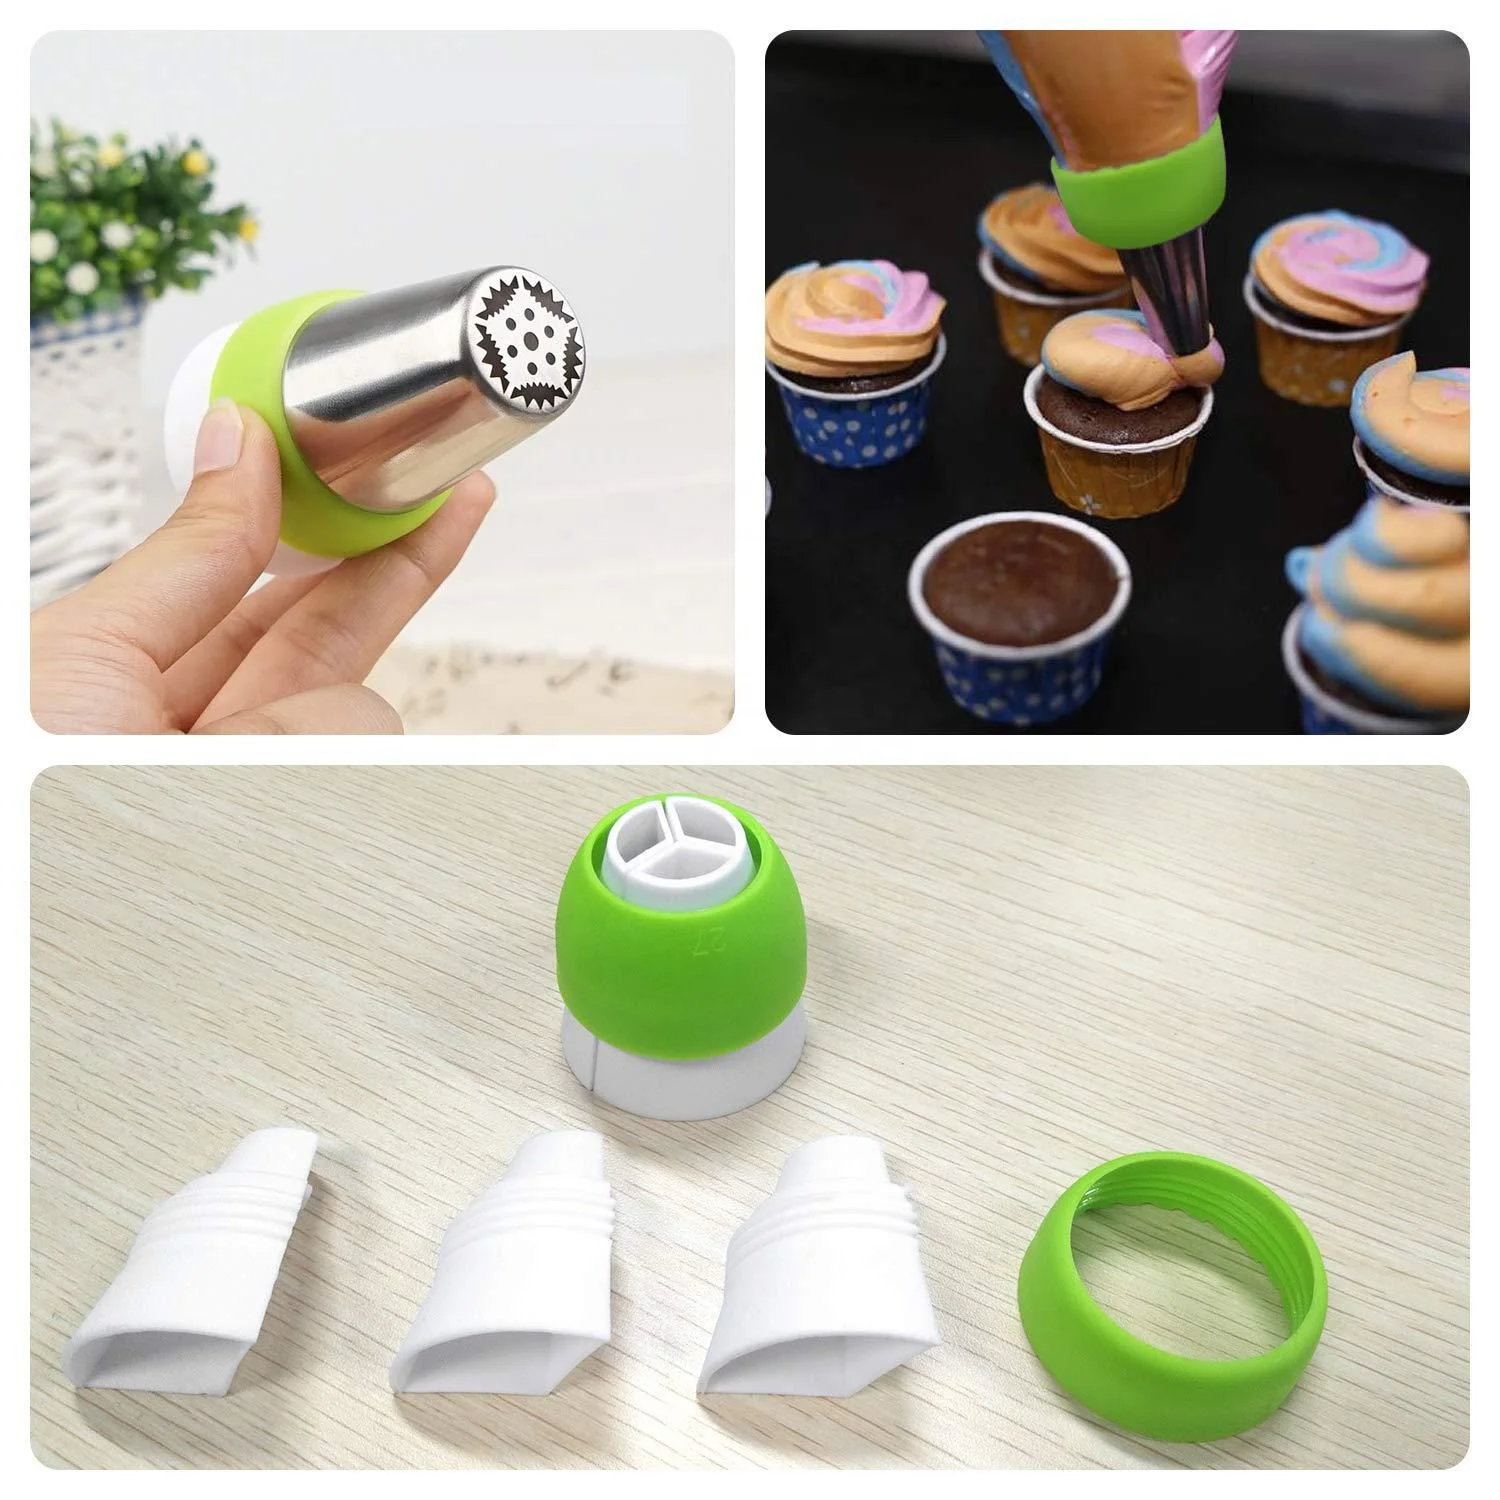 20 PCS Silicone Cake Accessories Nozzles Tips Cake Decoration Tools Bakes Flower Nozzles Large Cupcake Decorating Kit